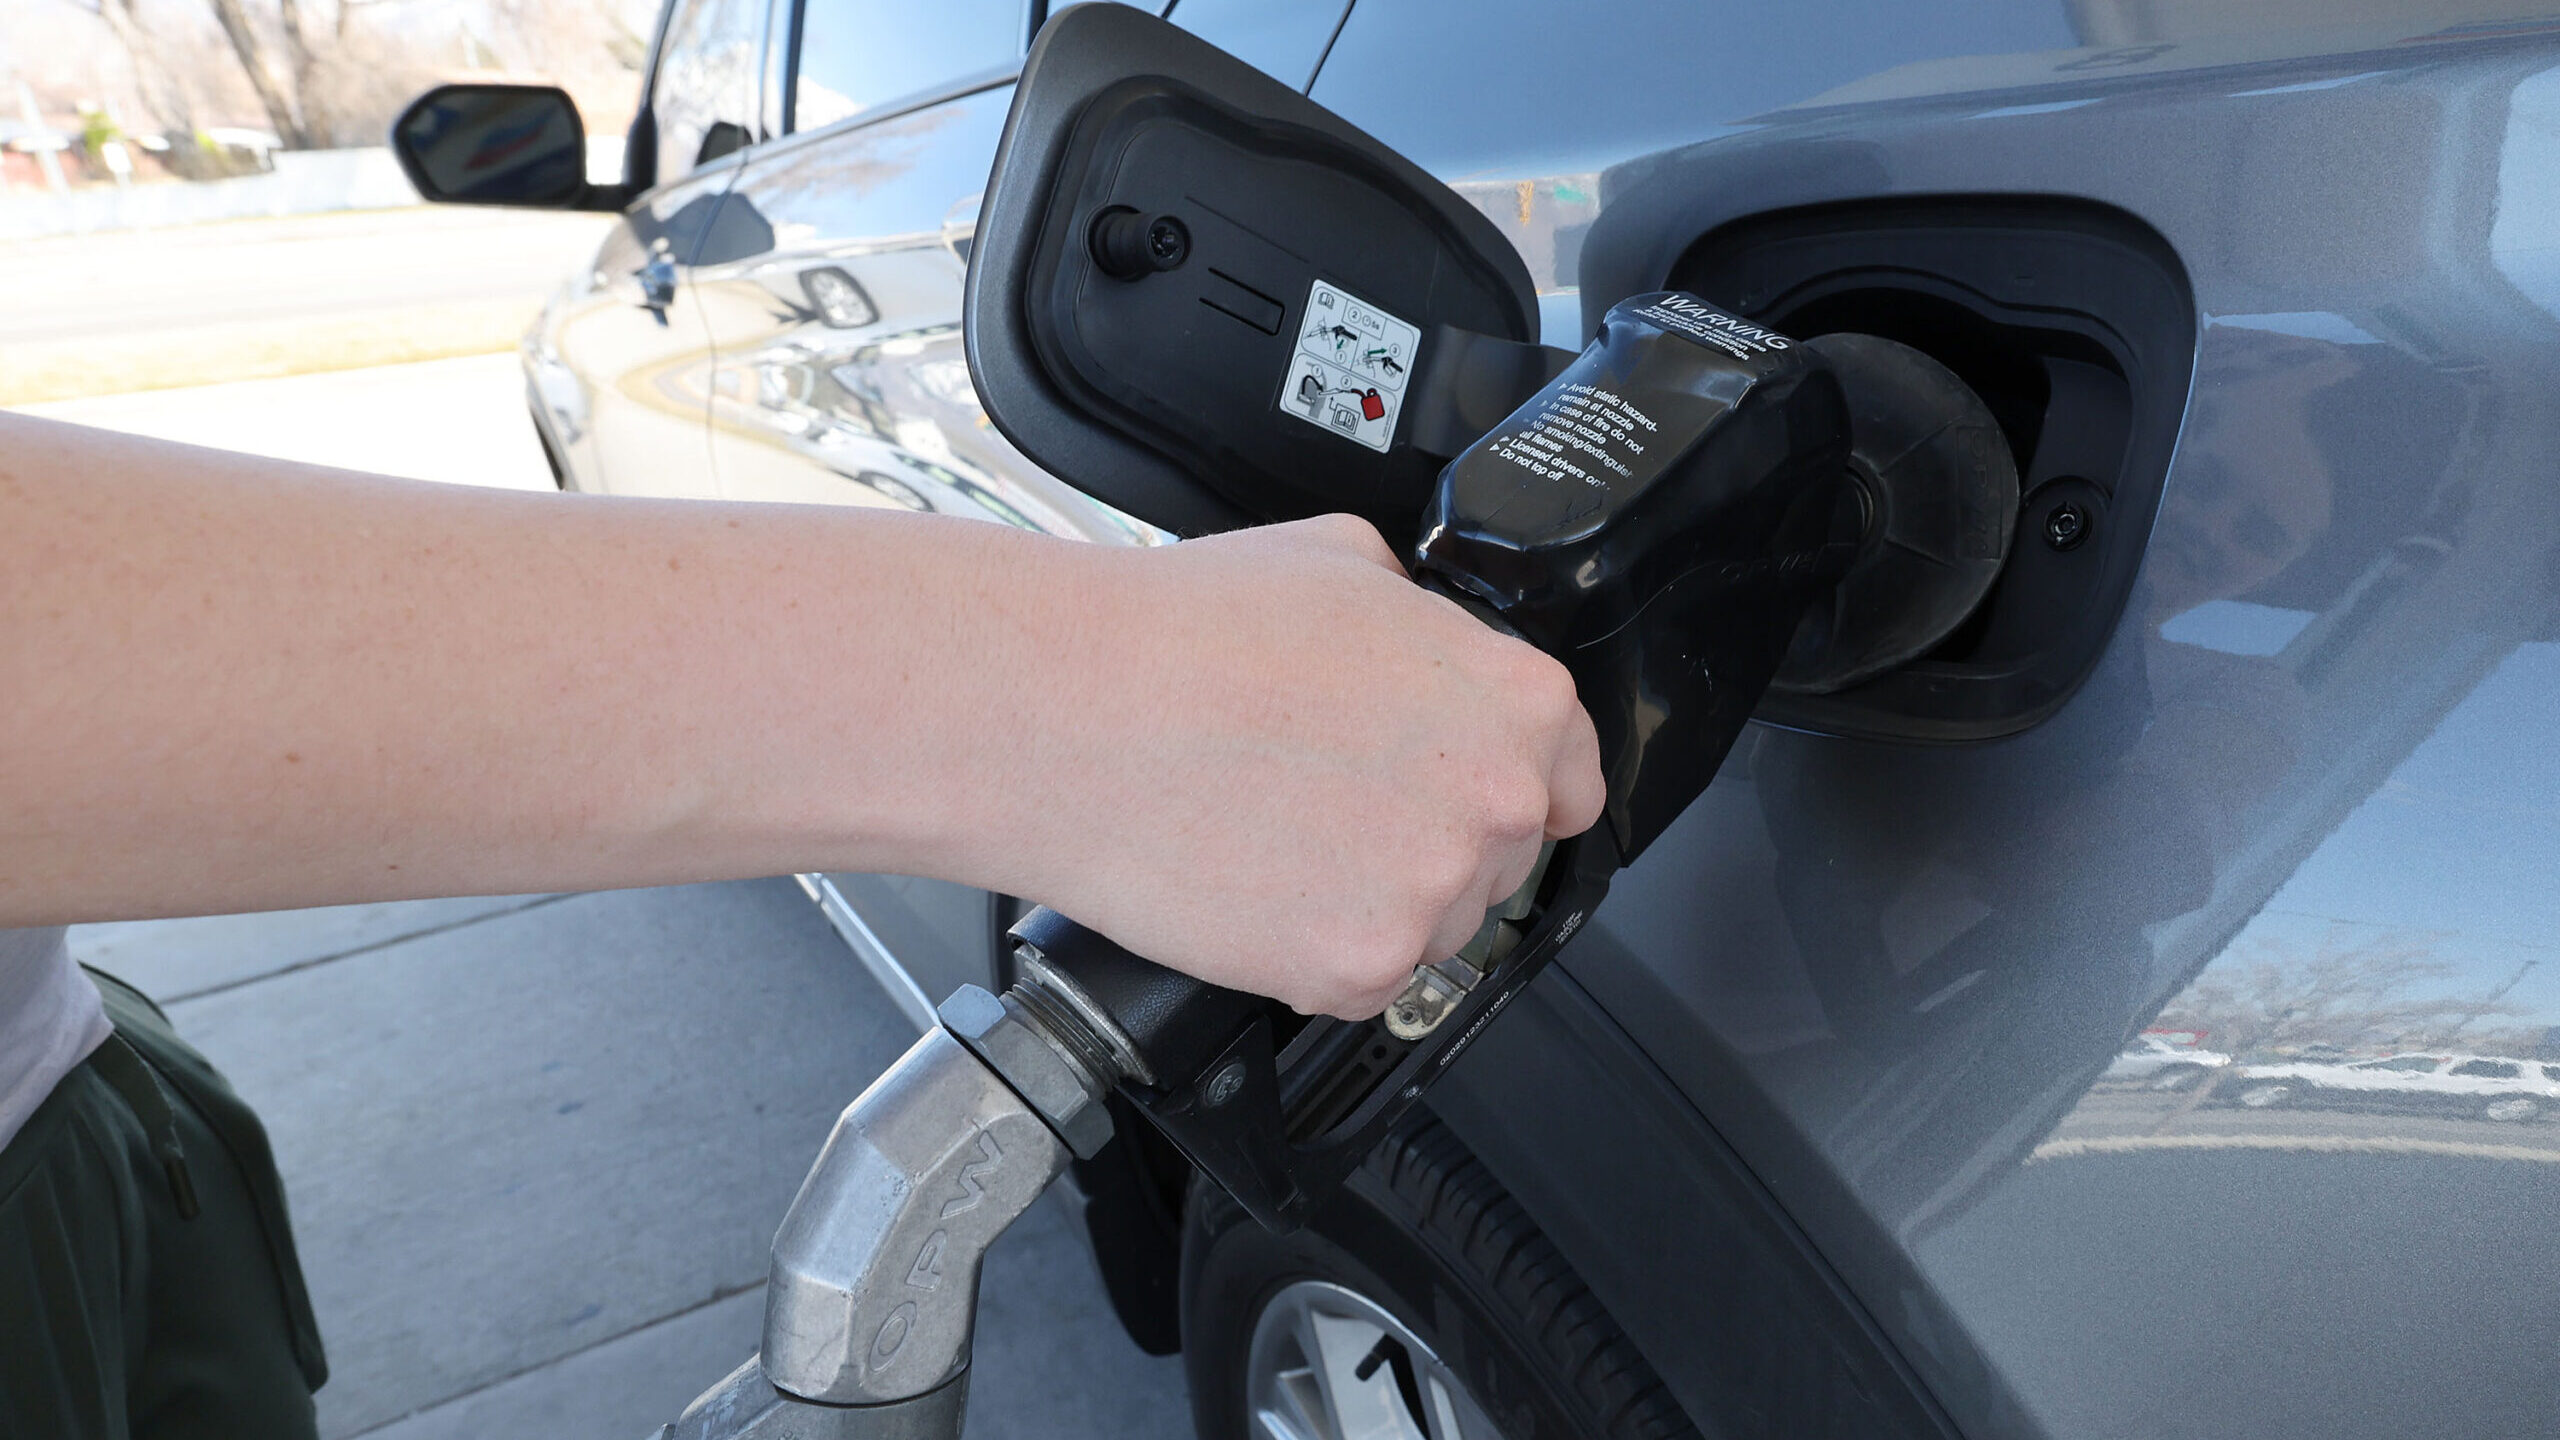 Utah gas prices are expected to stay low over the summer